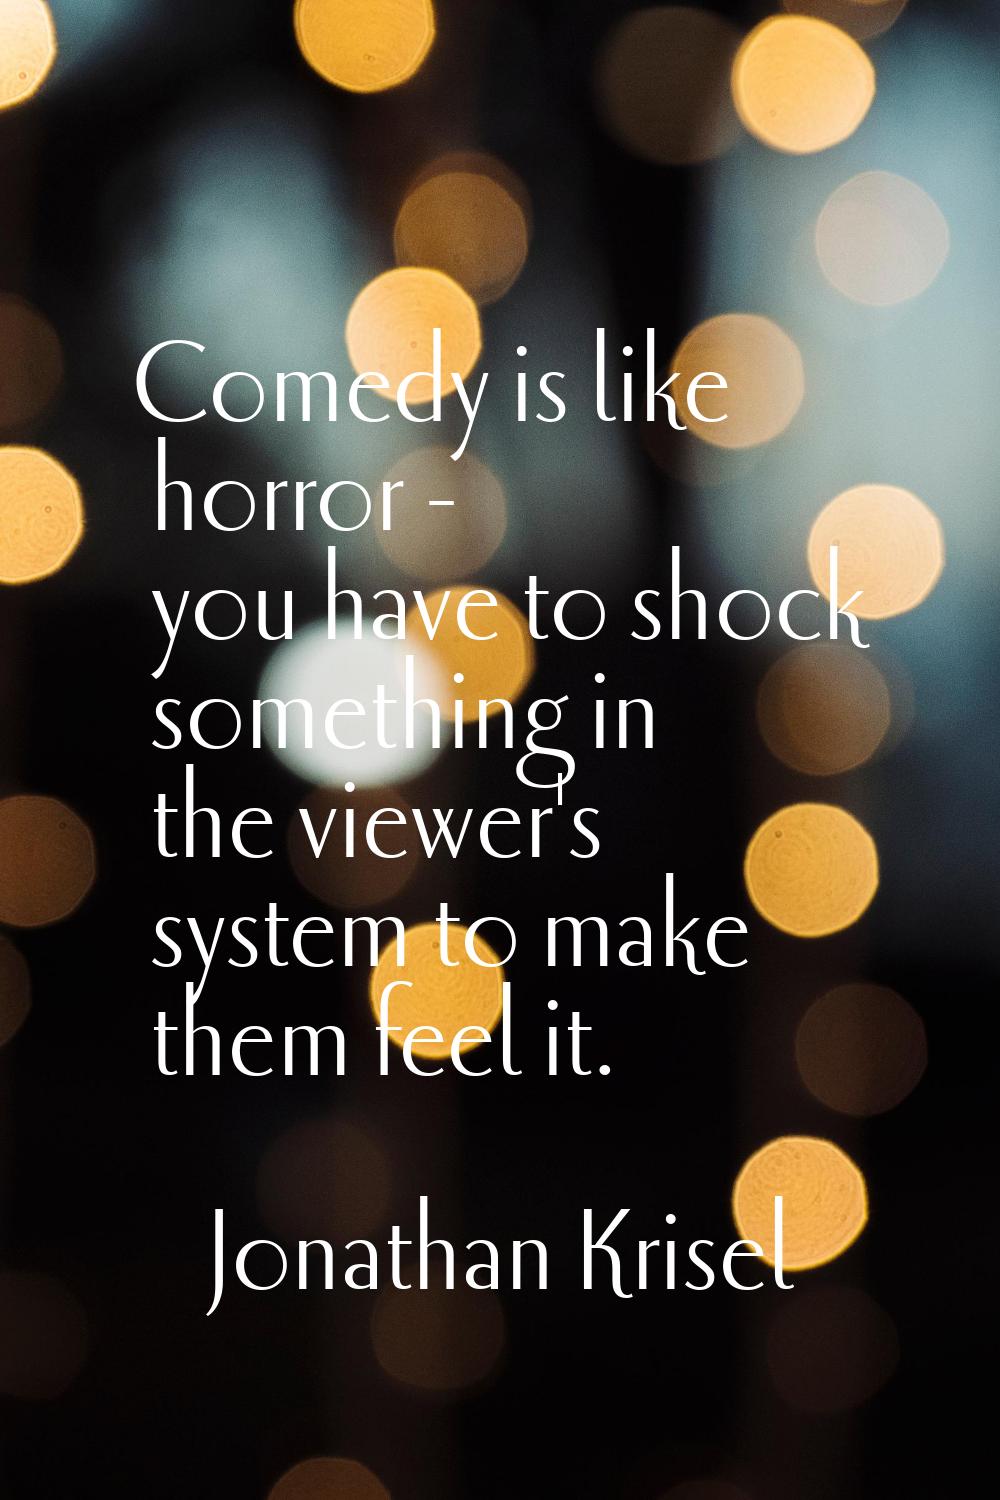 Comedy is like horror - you have to shock something in the viewer's system to make them feel it.